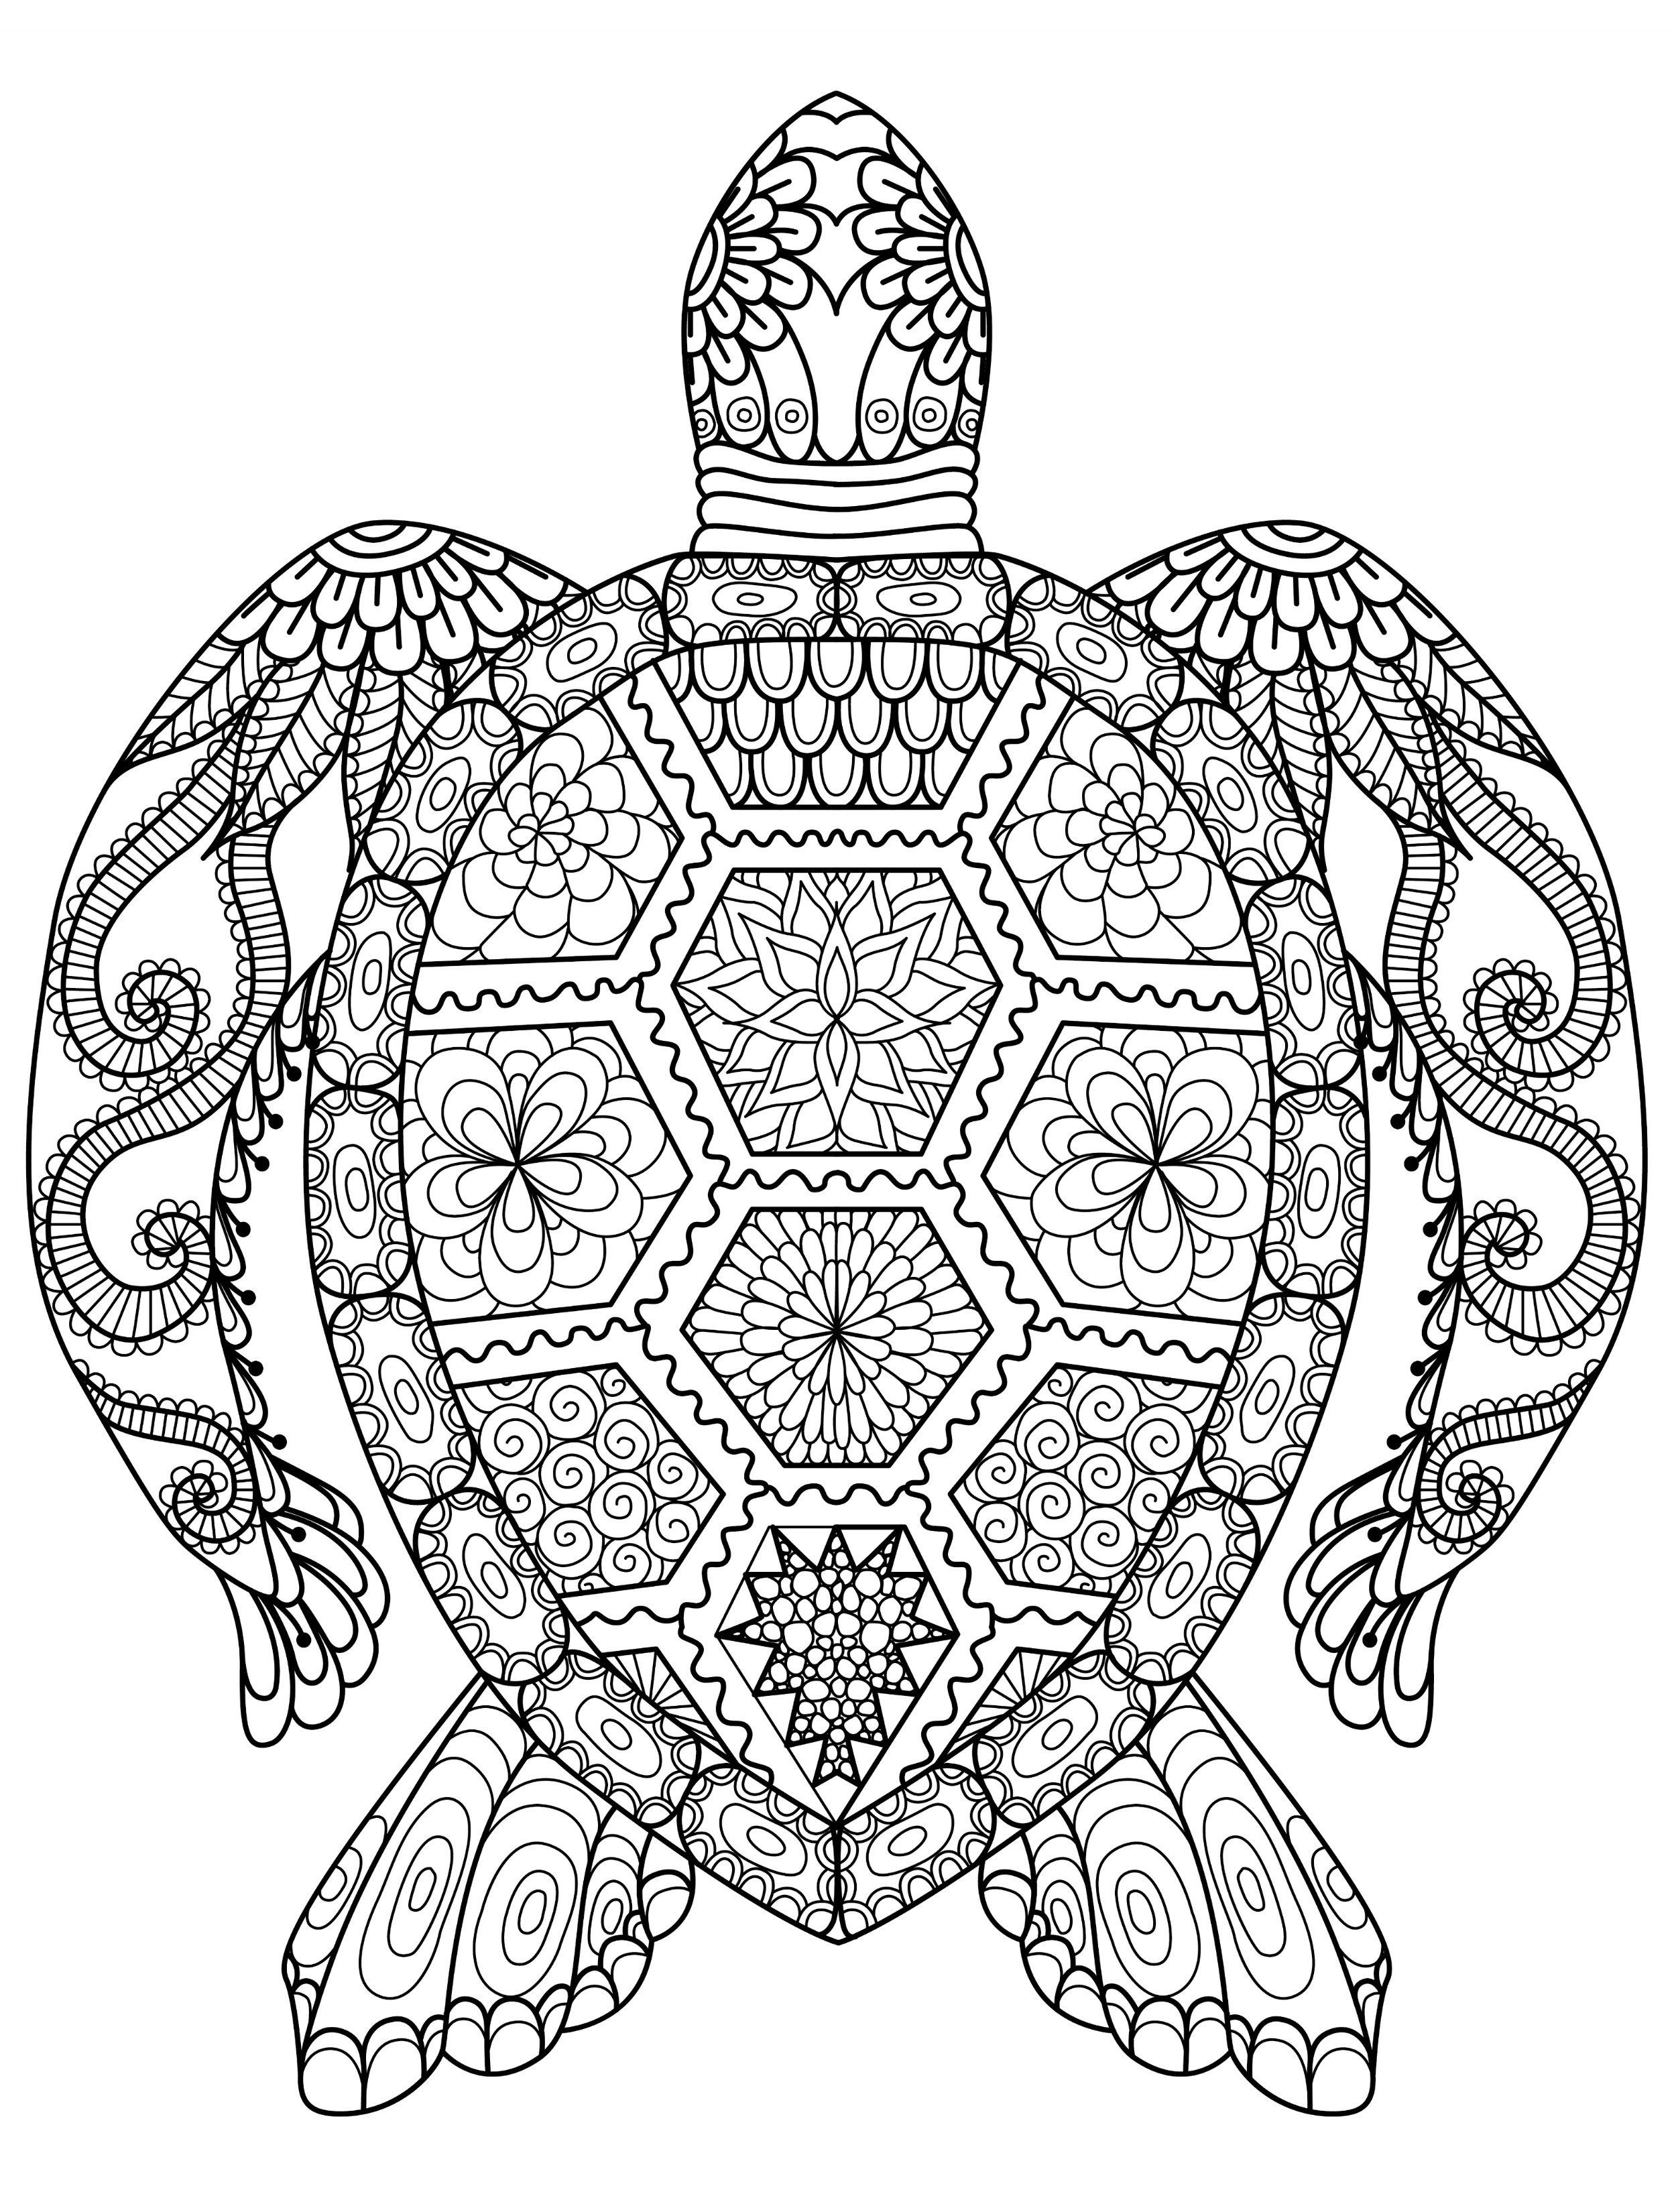 20 Gorgeous Free Printable Adult Coloring Pages … | Adult Coloring - Free Printable Coloring Cards For Adults